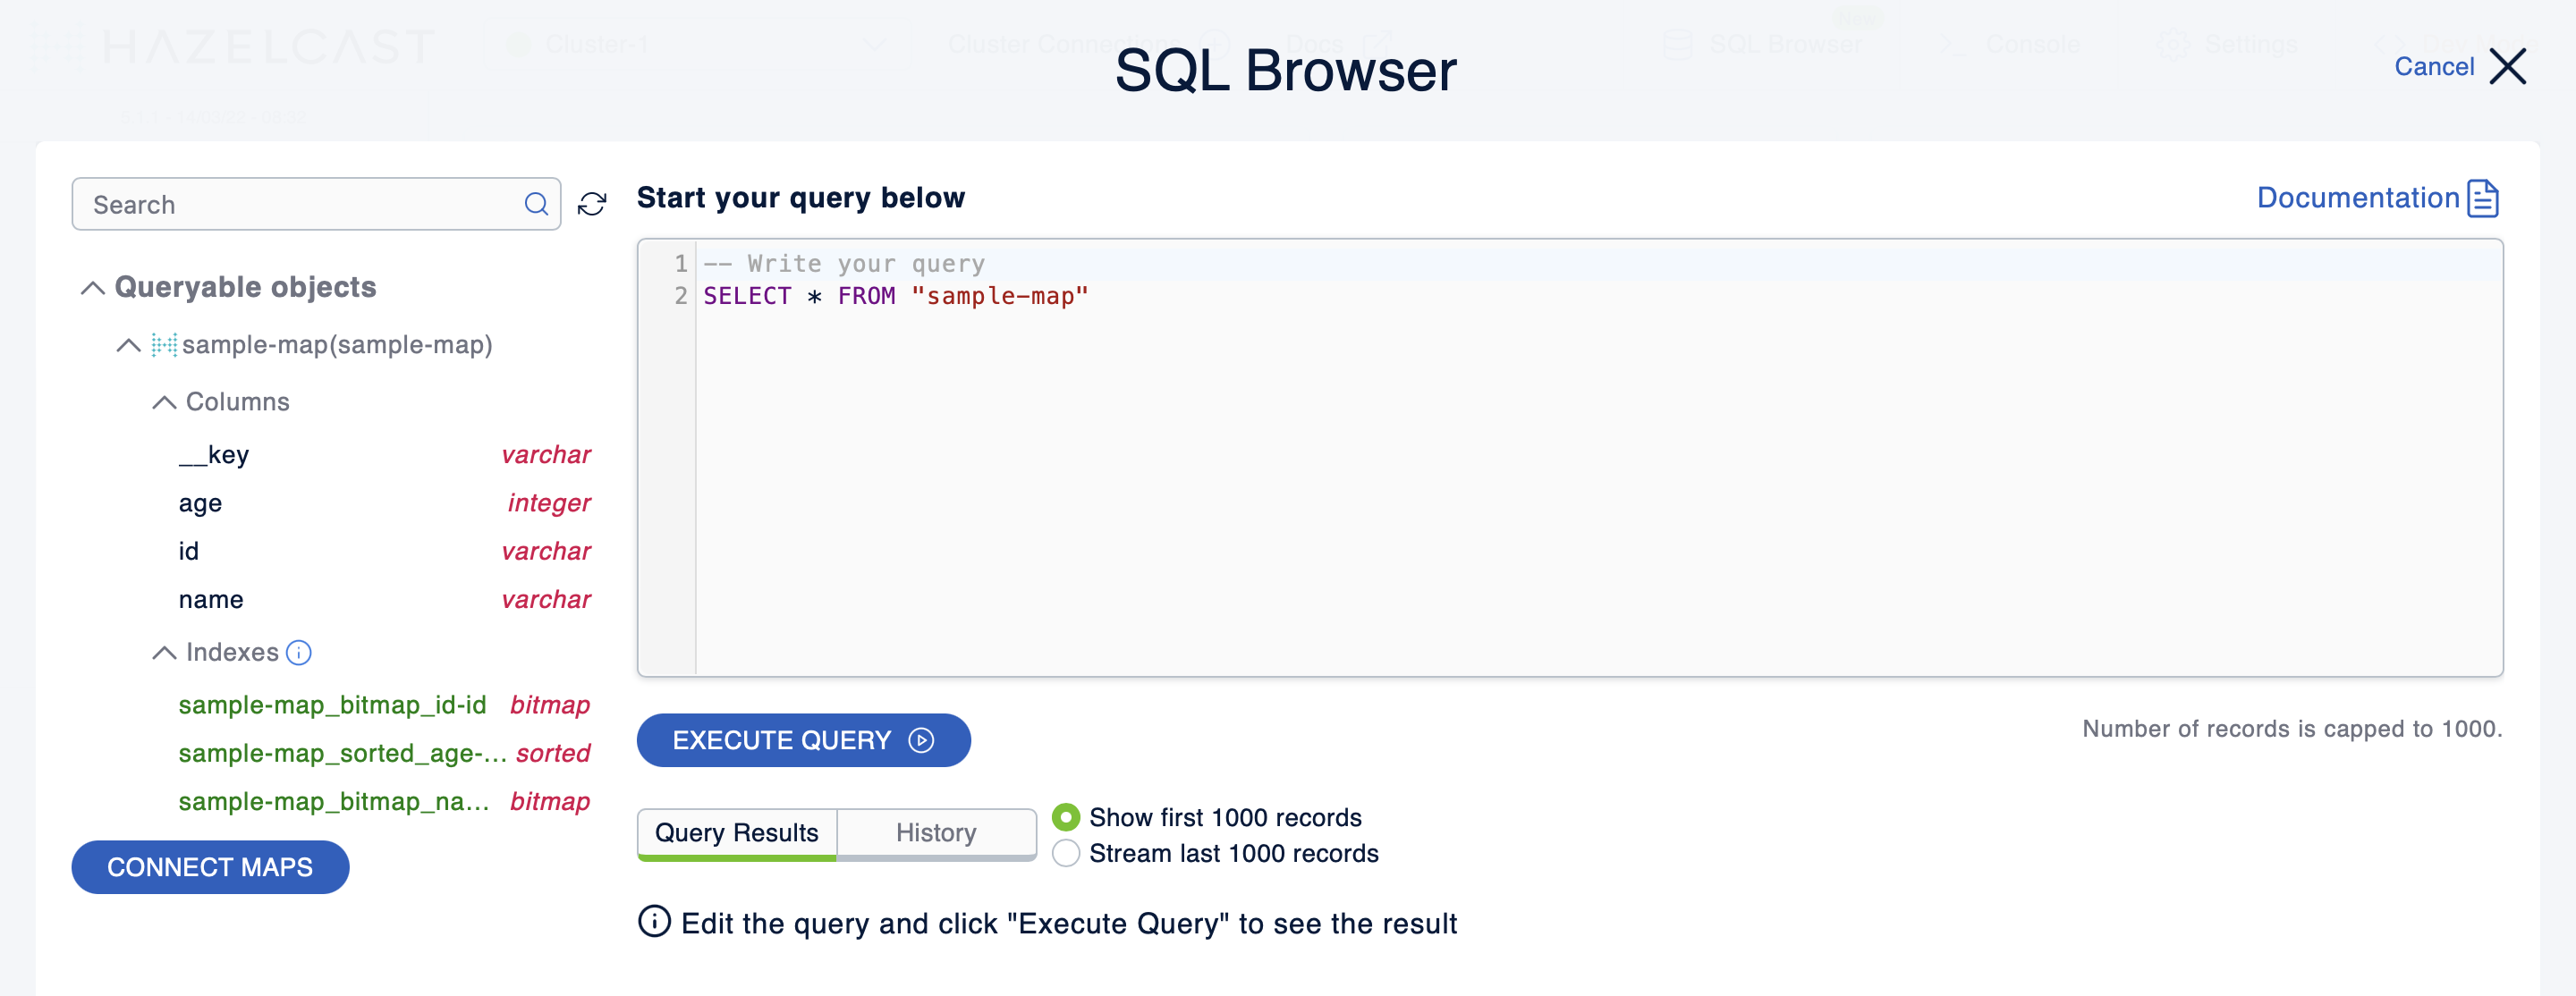 SQL Browser Queryable Objects